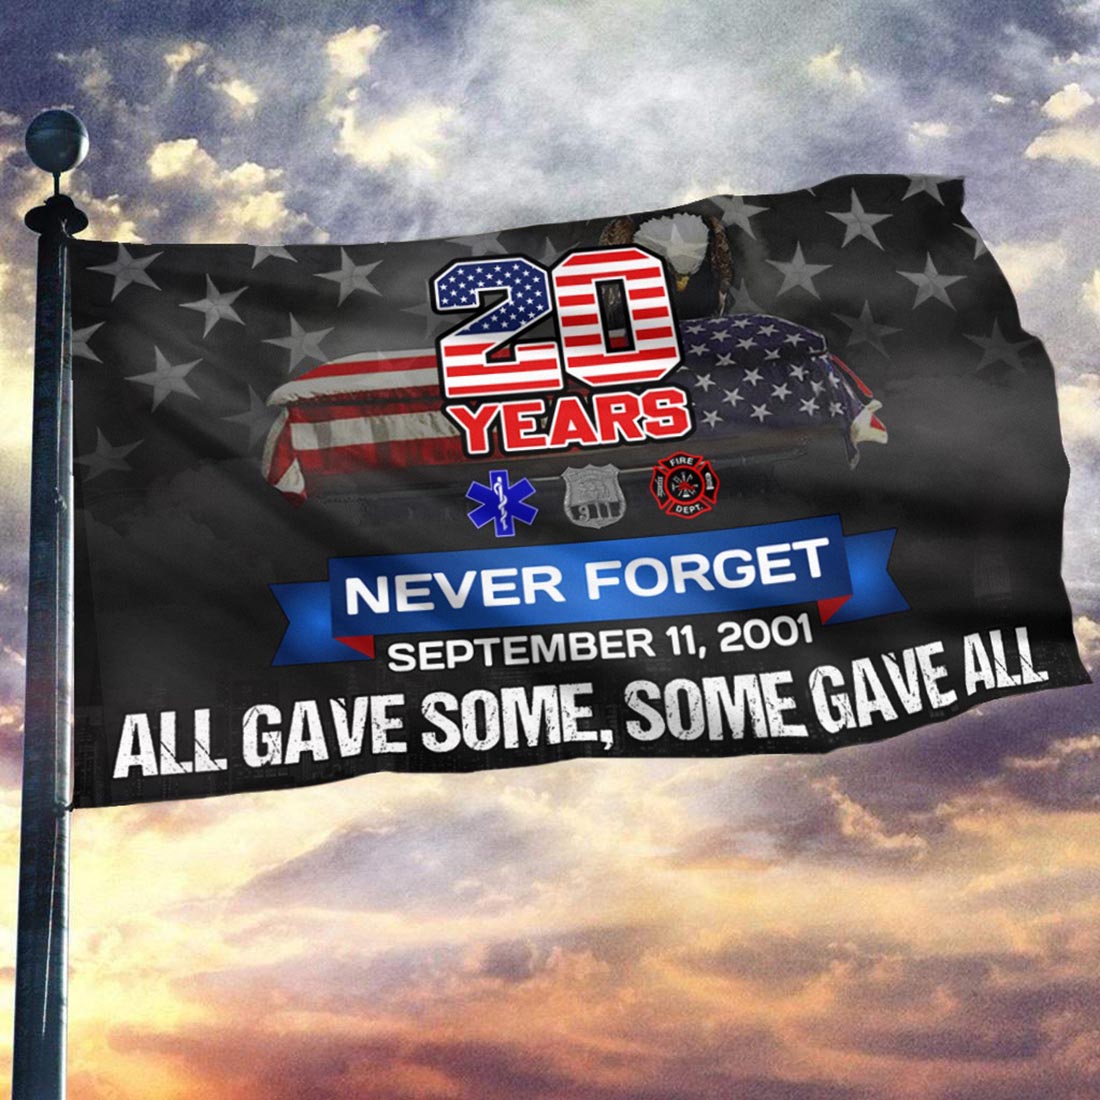 20 Years - 9/11 - All Gave Some Some Gave All Flag